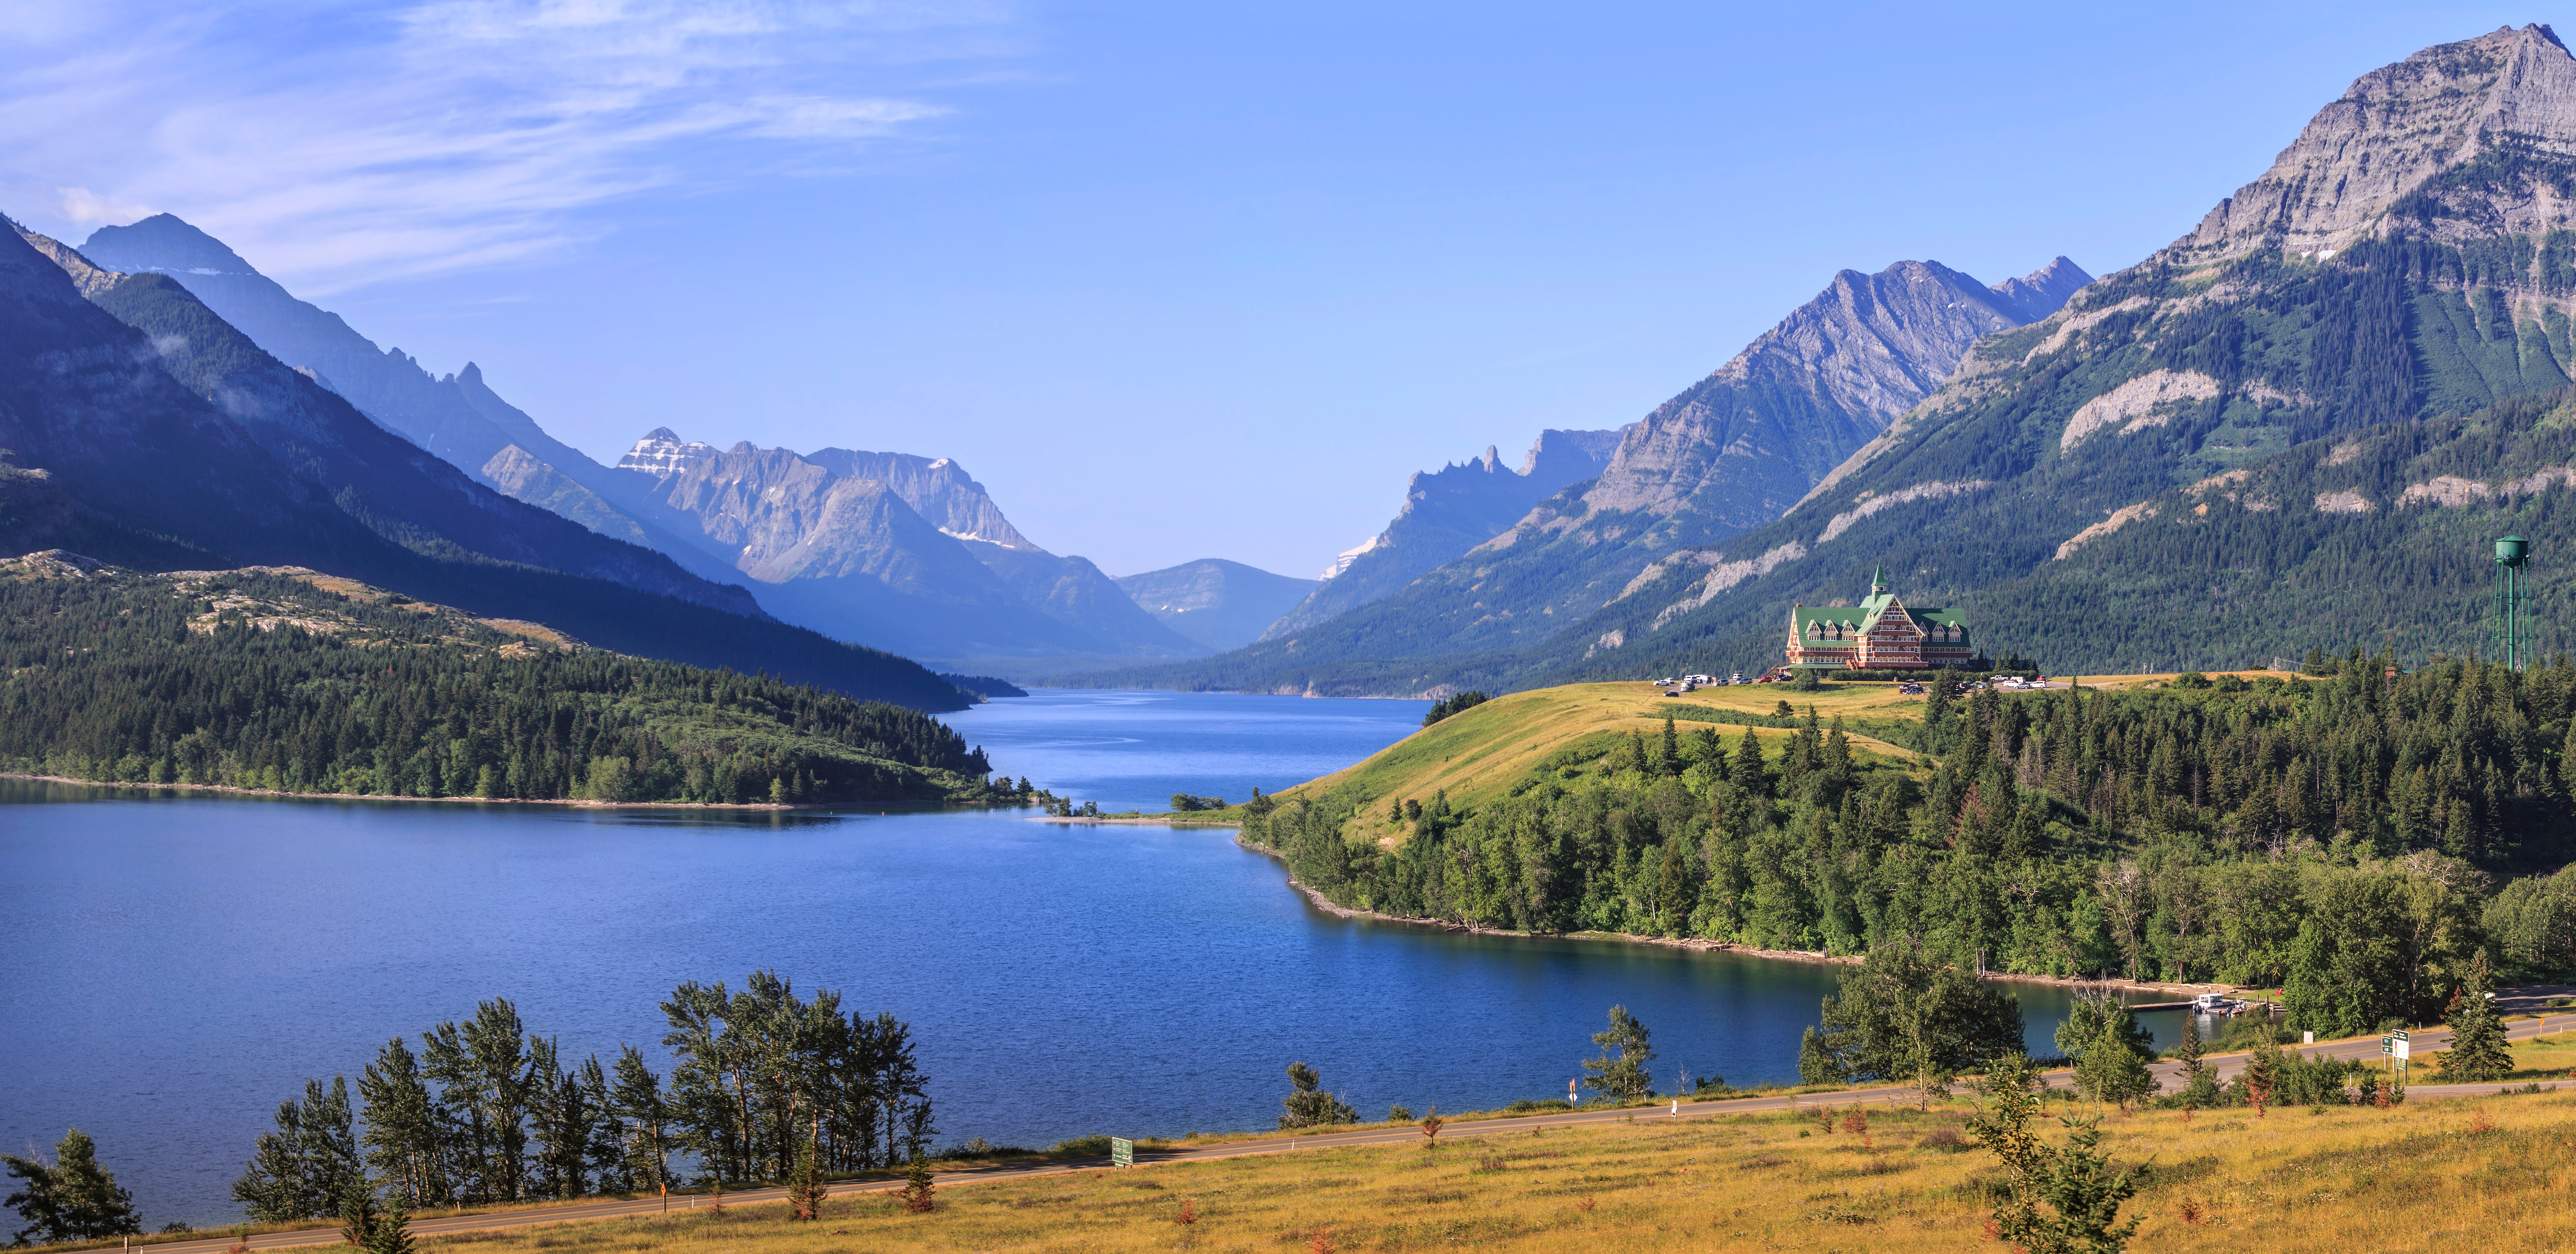 A view of Waterton Lakes National Park